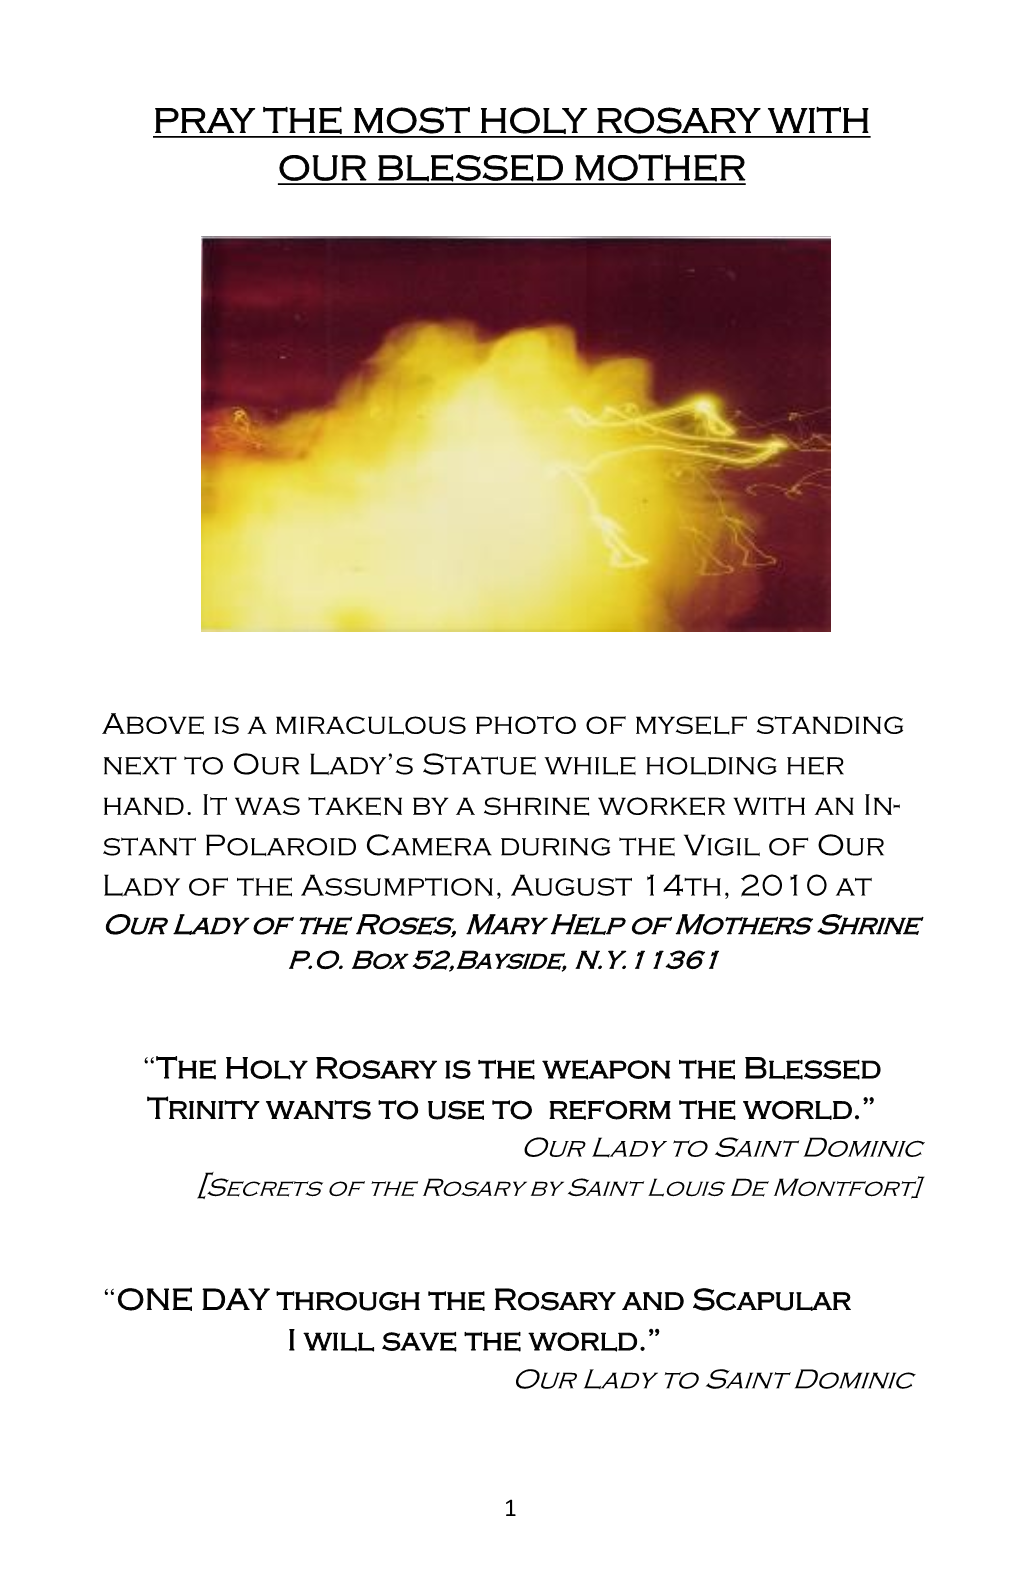 Rosary Booklet Publication